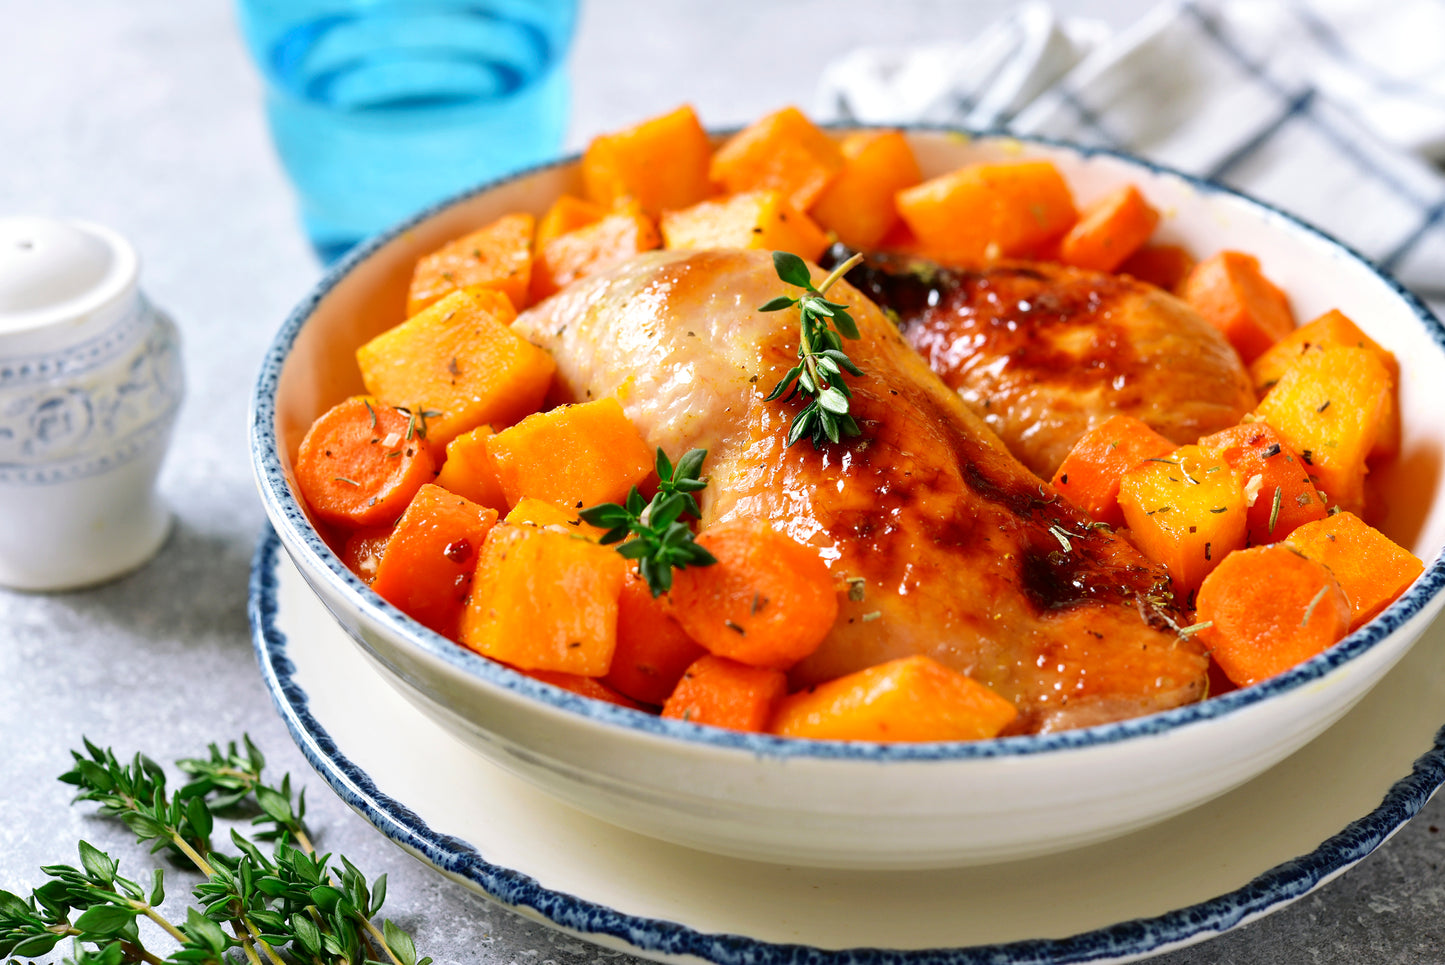 Slow-Cooker Turkey (or Chicken) and Sweet Potato Stew